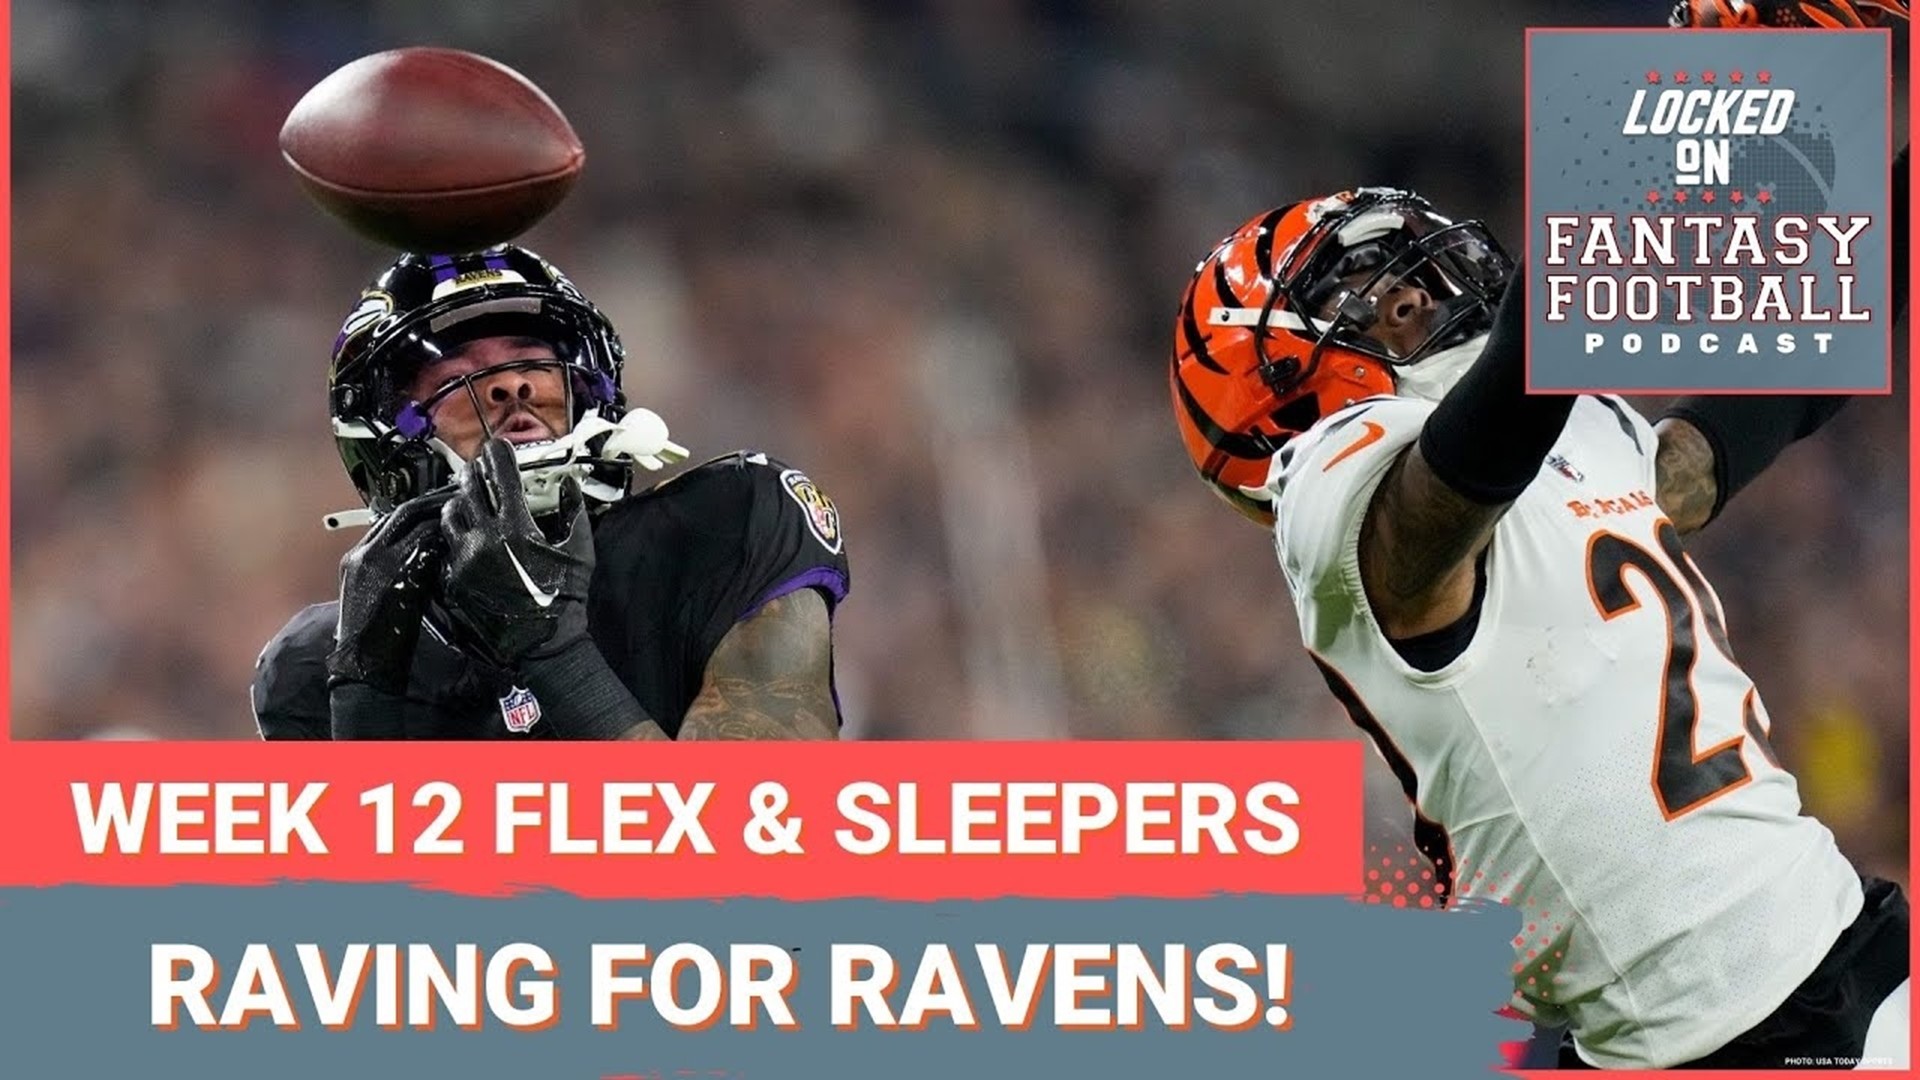 Sporting News' Vinnie Iyer and NFL.com's Michelle Magdziuk wrap up fantasy football analysis for Week 12 by looking at recommended FLEX plays of the week.